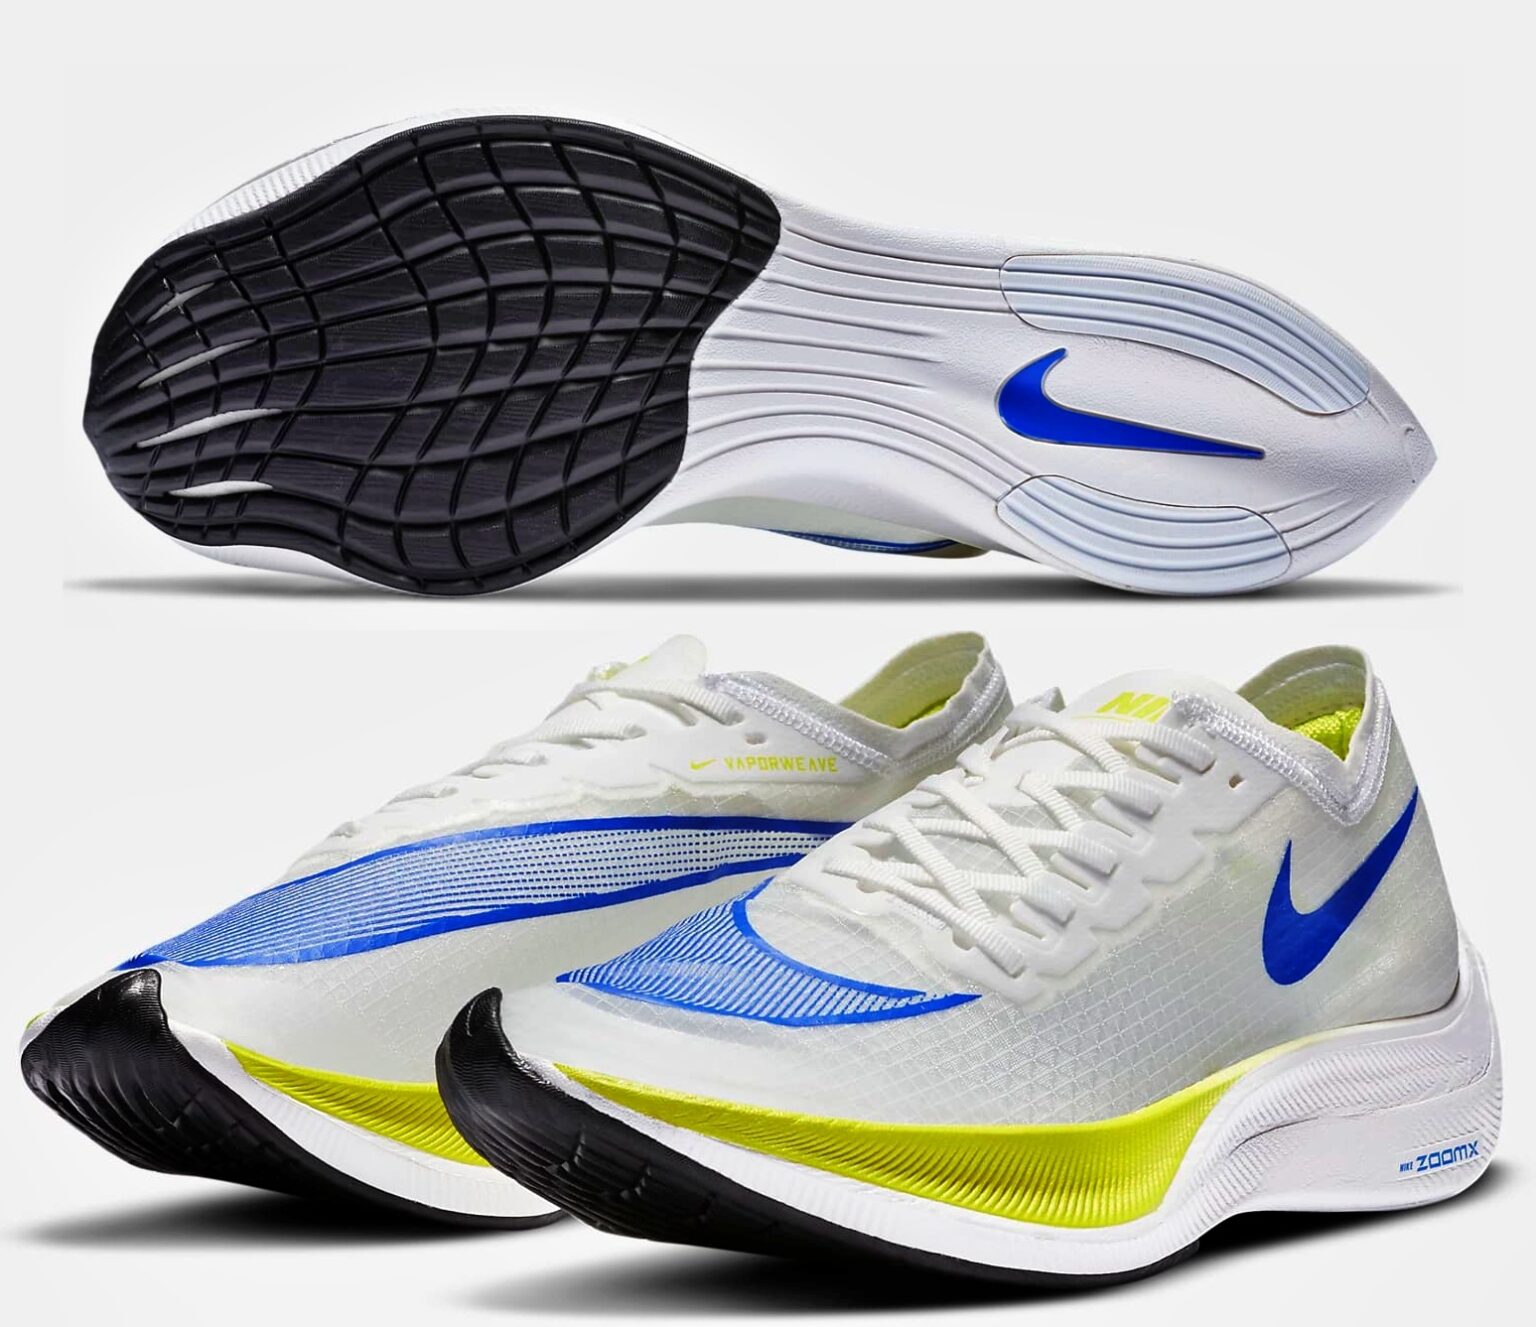 Which Nike Marathon shoes are best for marathon? Latest Review!